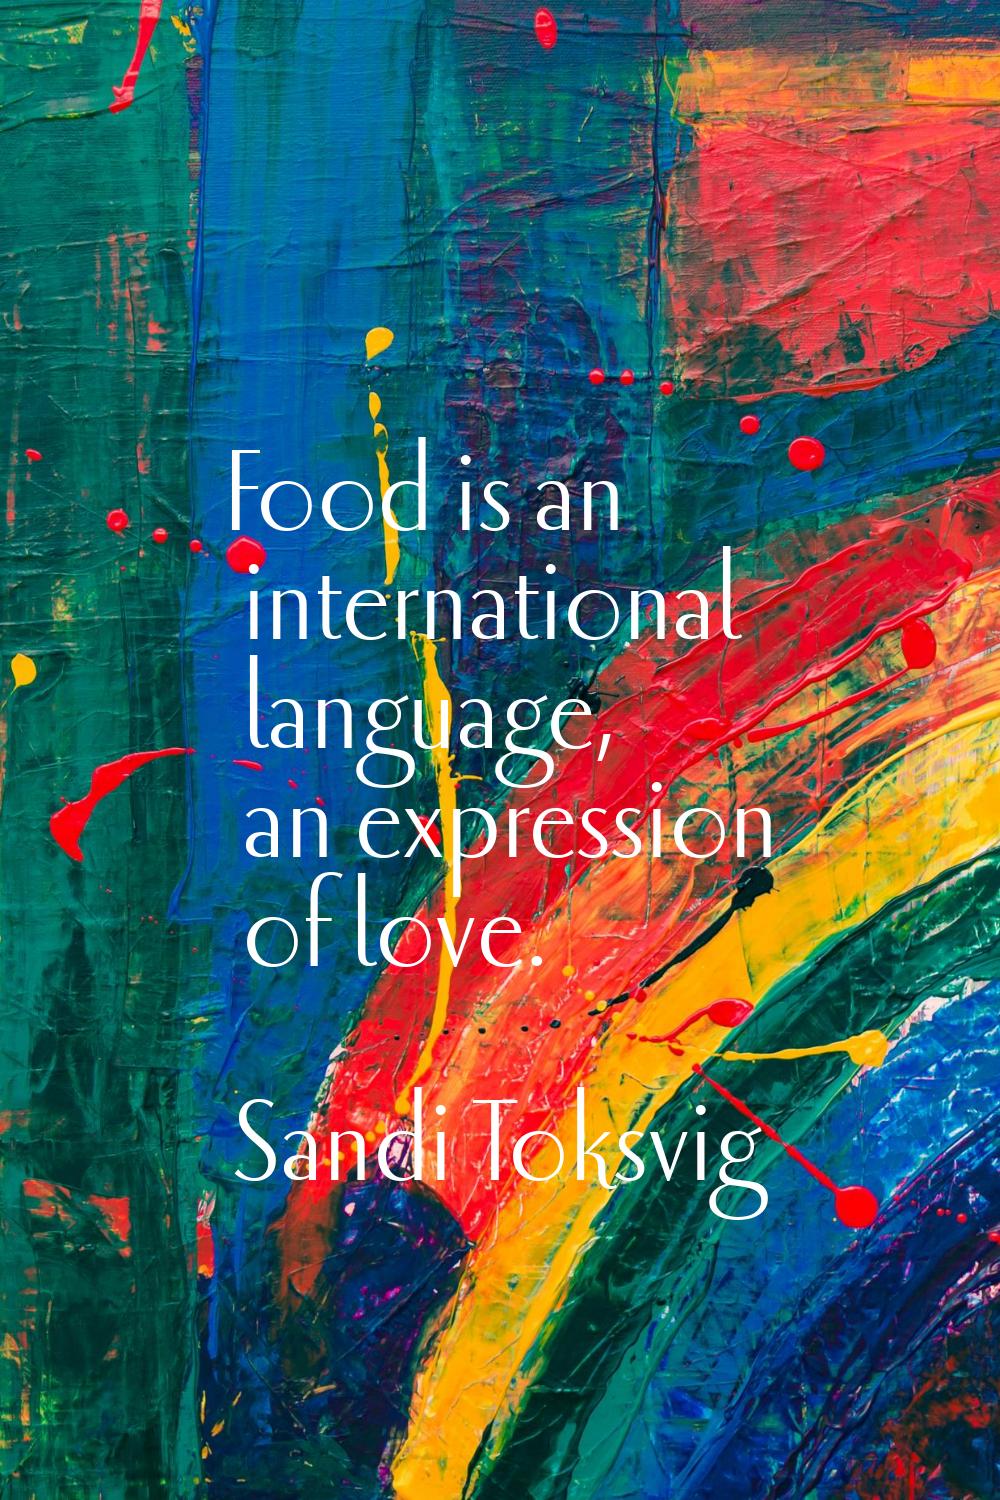 Food is an international language, an expression of love.